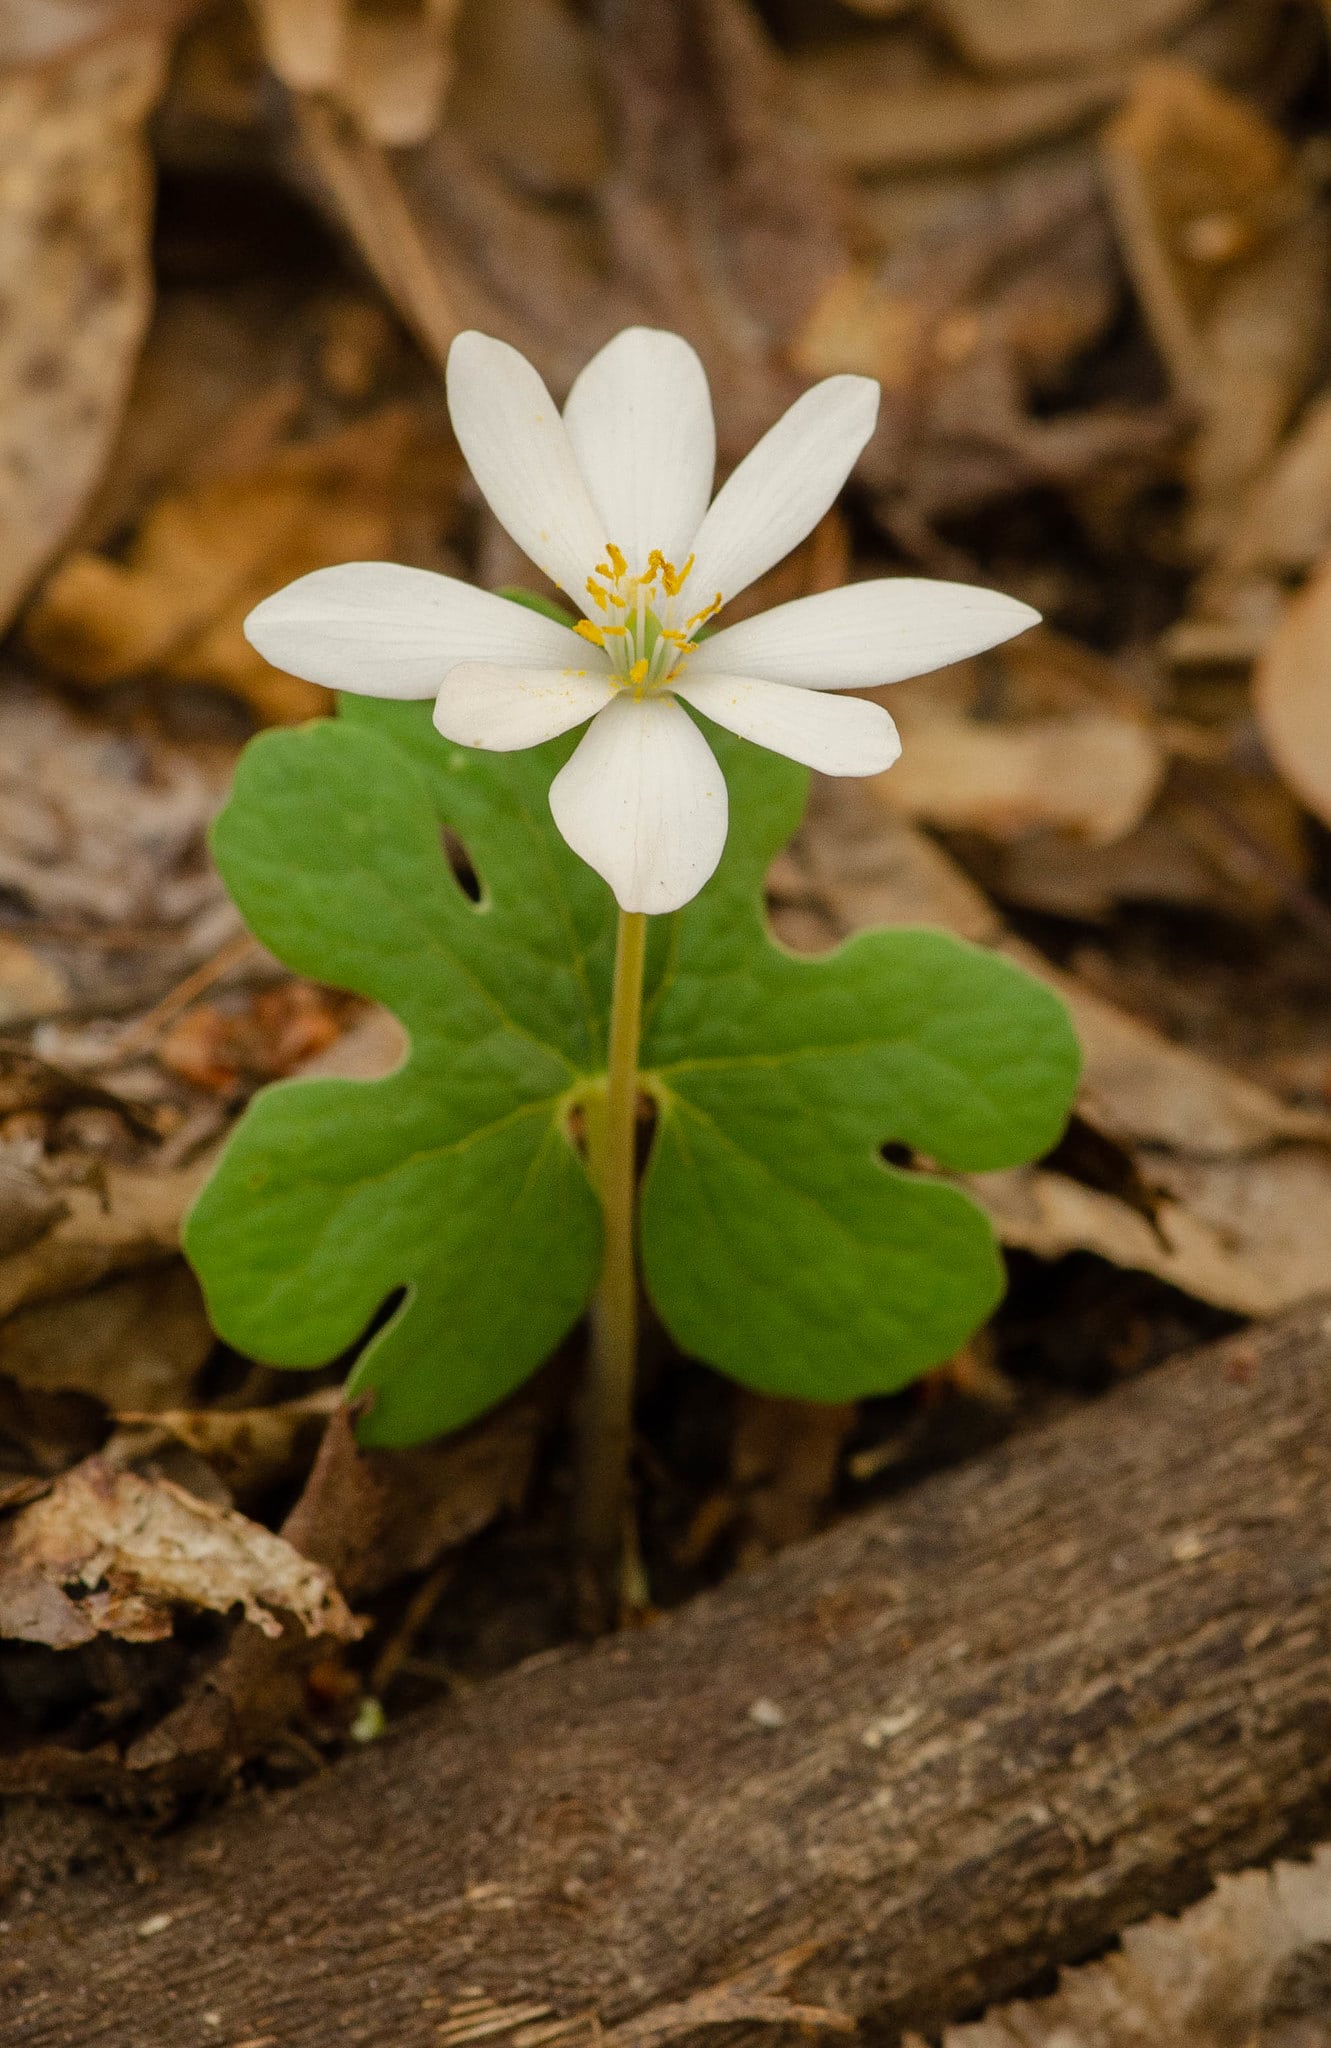 vertical photo of a bloodroot flower growing in amongst dead leaves and twigs